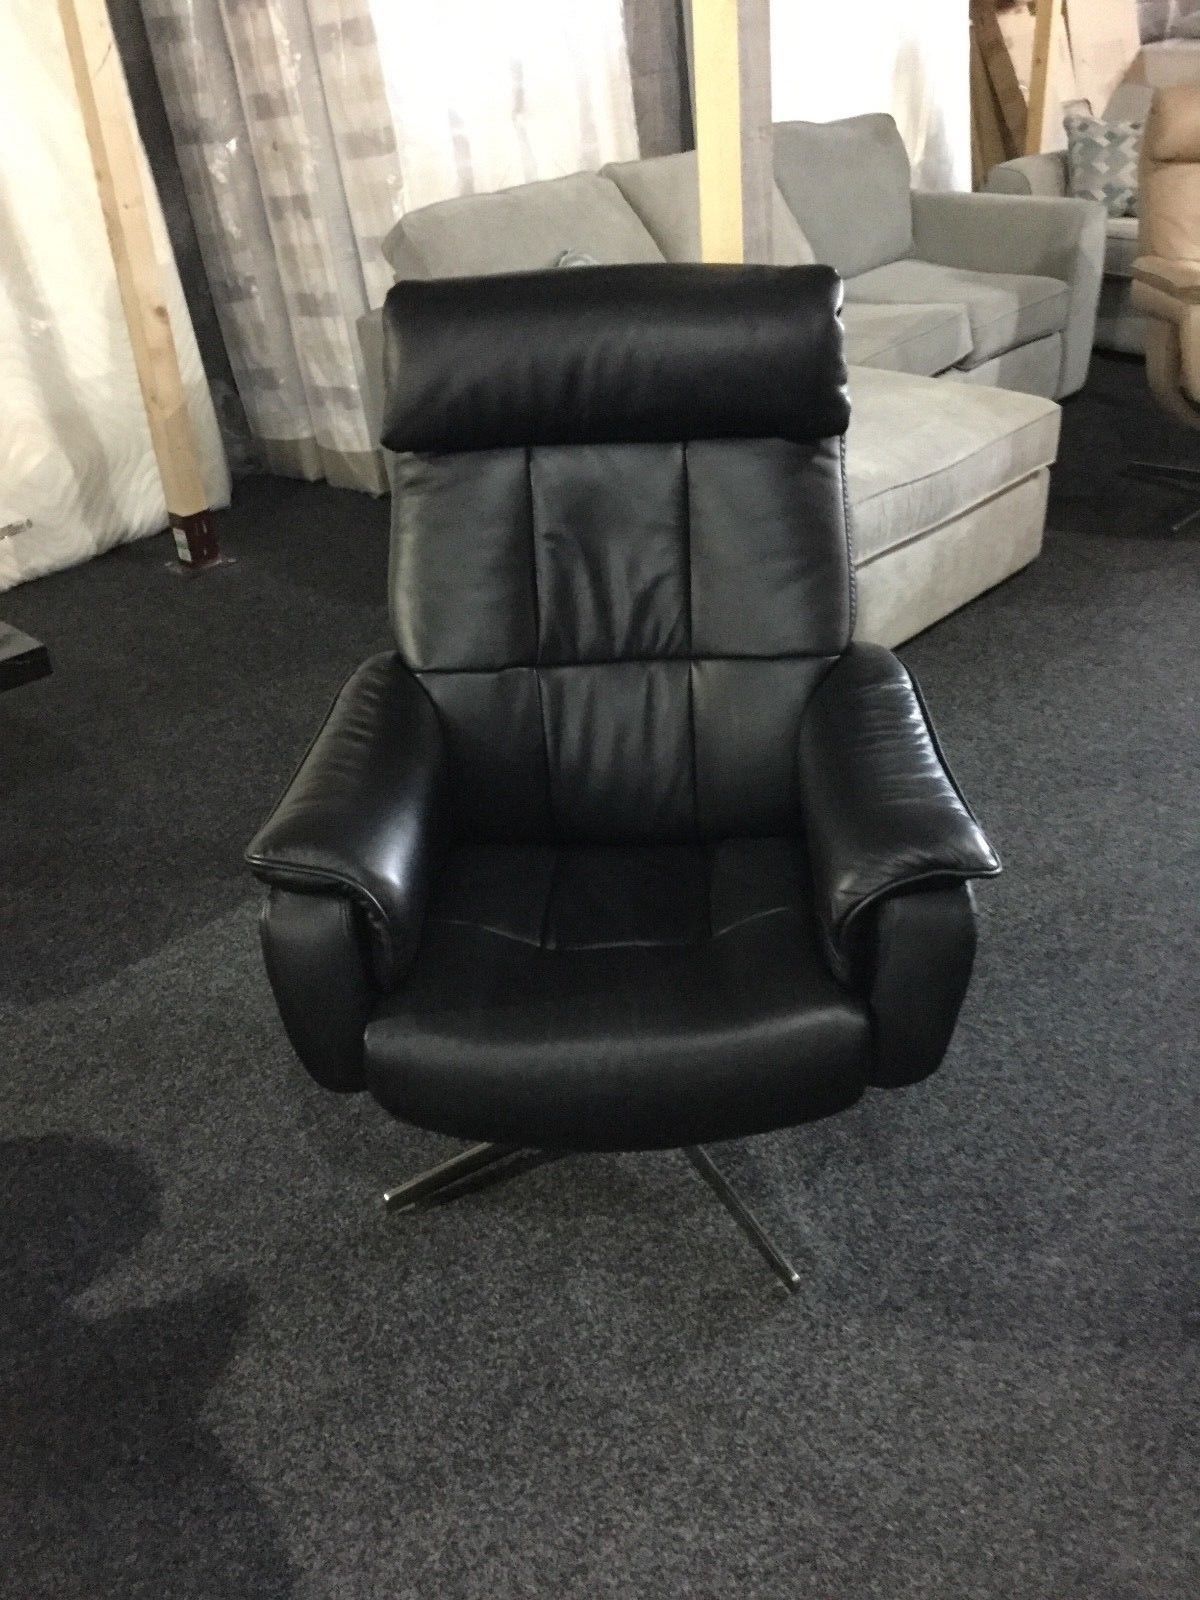 Shades Black Leather Swivel Chair – Affordable Furnishings In Leather Black Swivel Chairs (View 14 of 25)